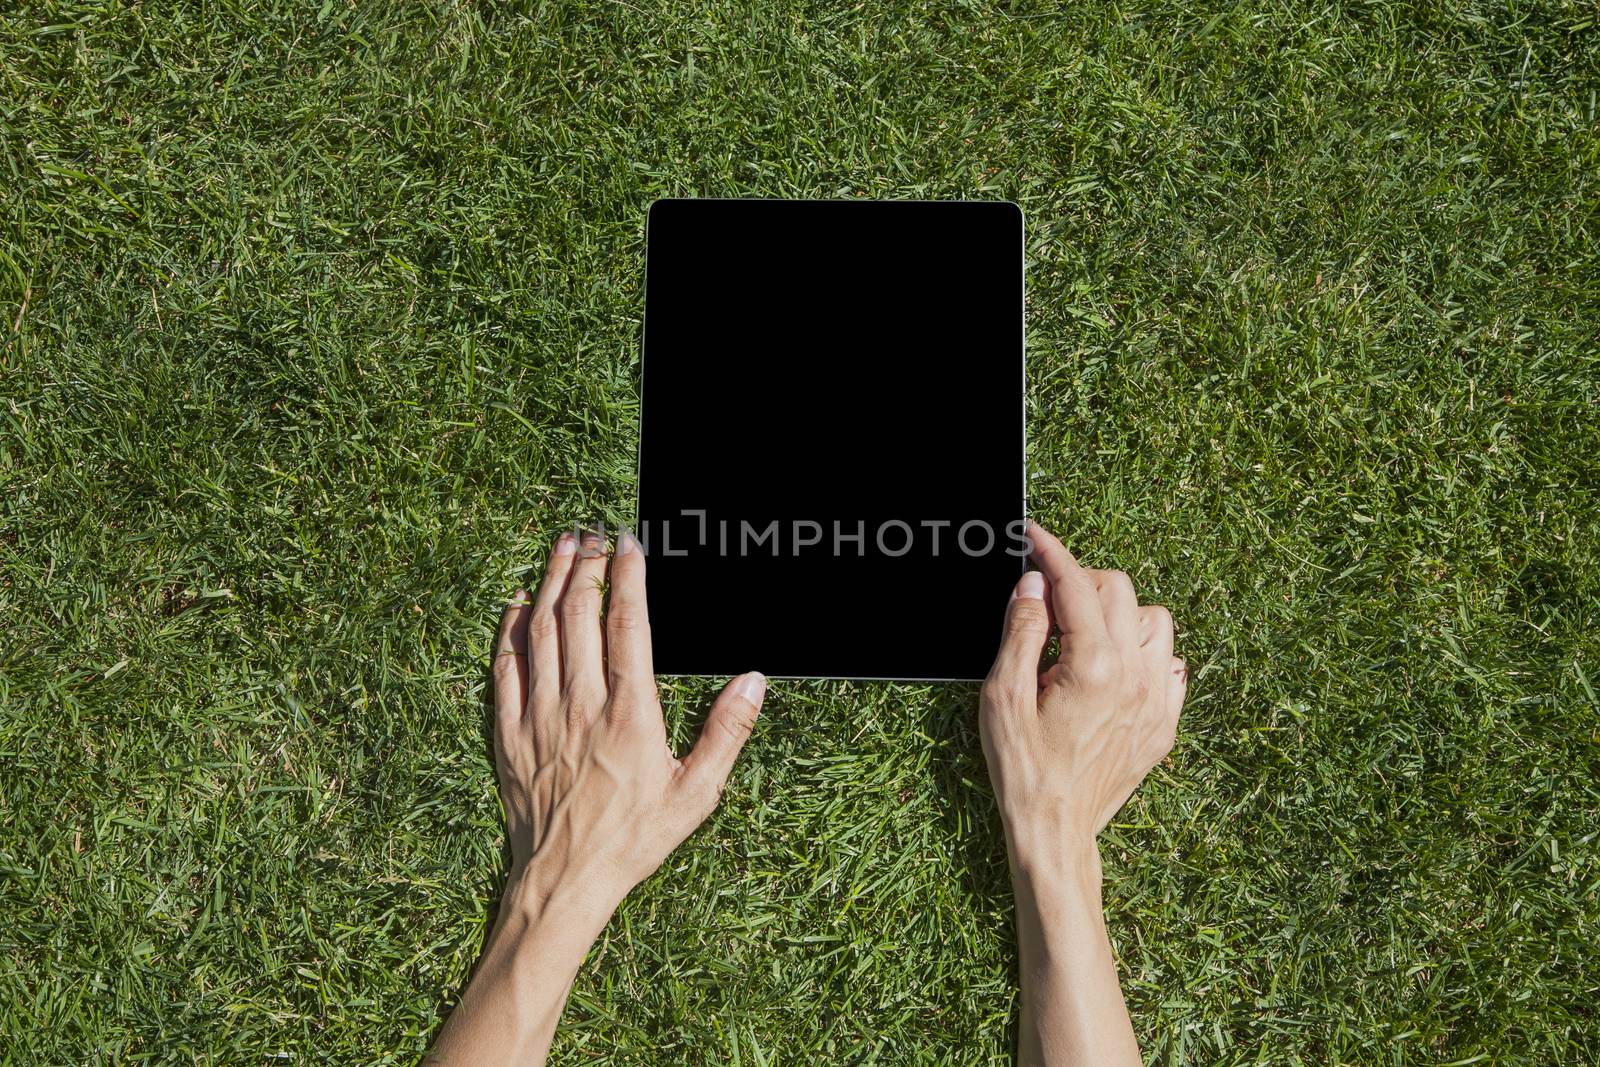 both hands of woman touching digital tablet blank black screen on green grass lawn in park